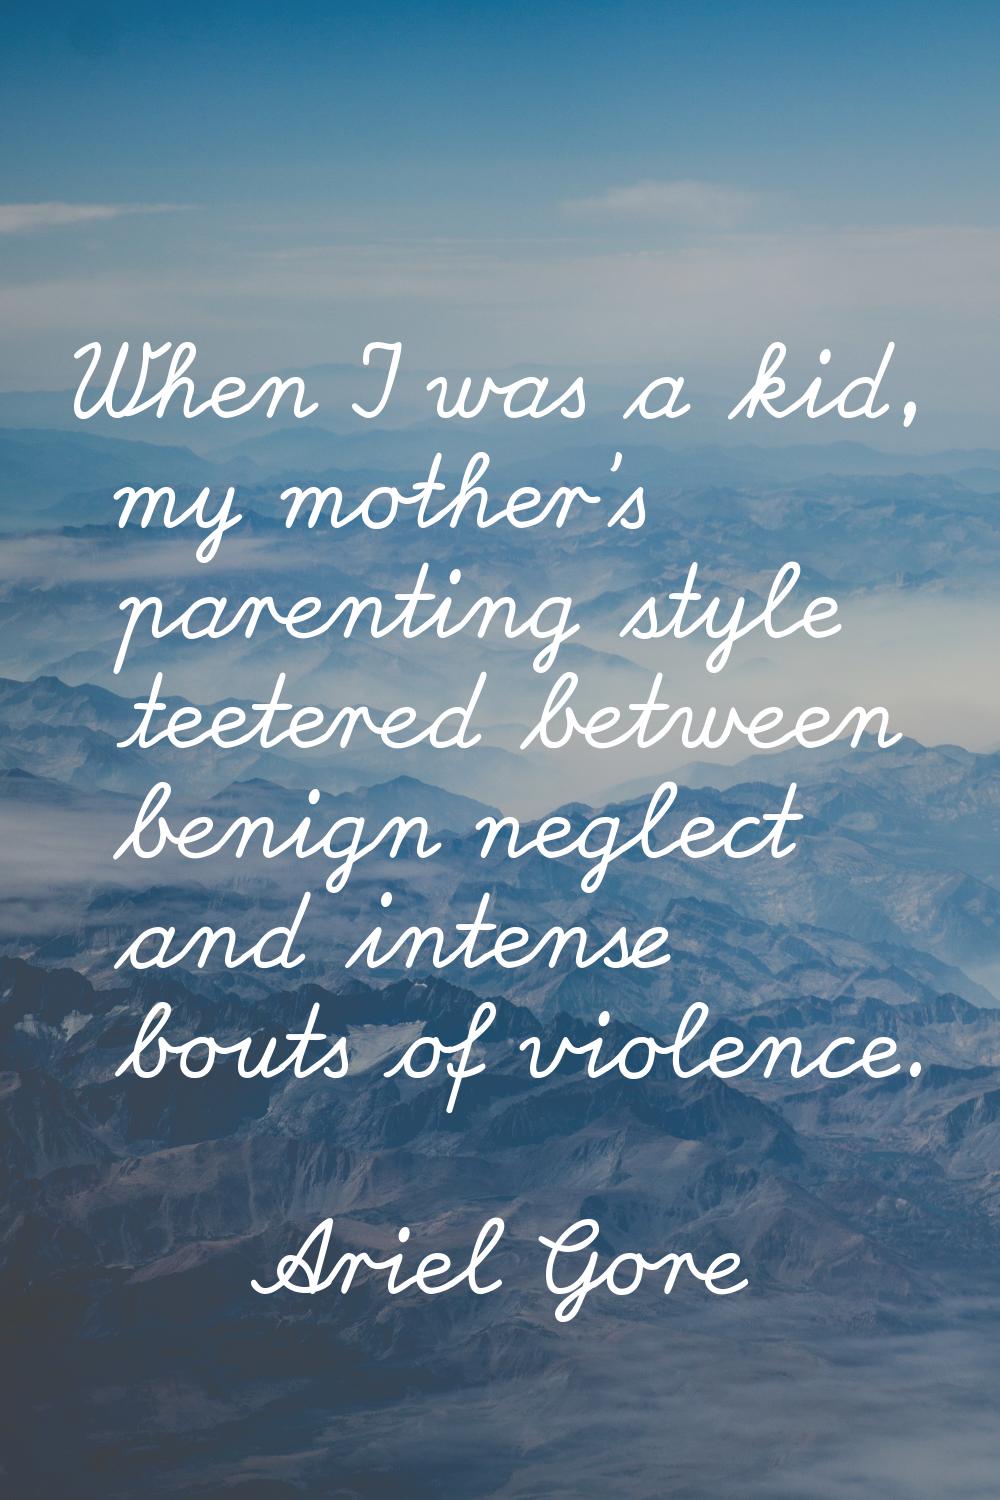 When I was a kid, my mother's parenting style teetered between benign neglect and intense bouts of 